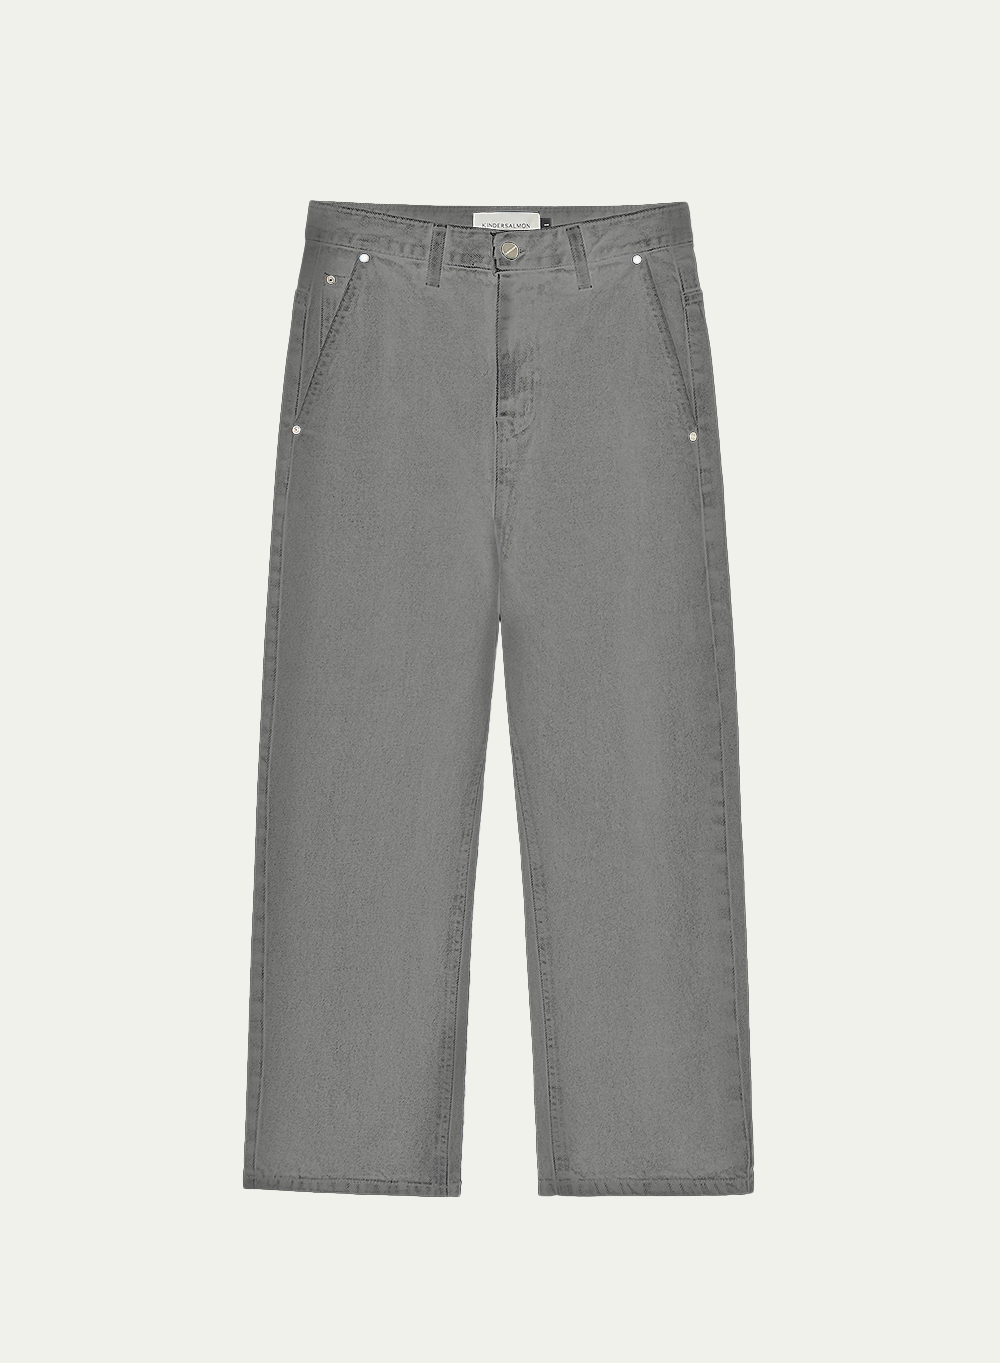 SS22 쉬셀 Schüssel Jeans Dusty-gray @youtharchivee review